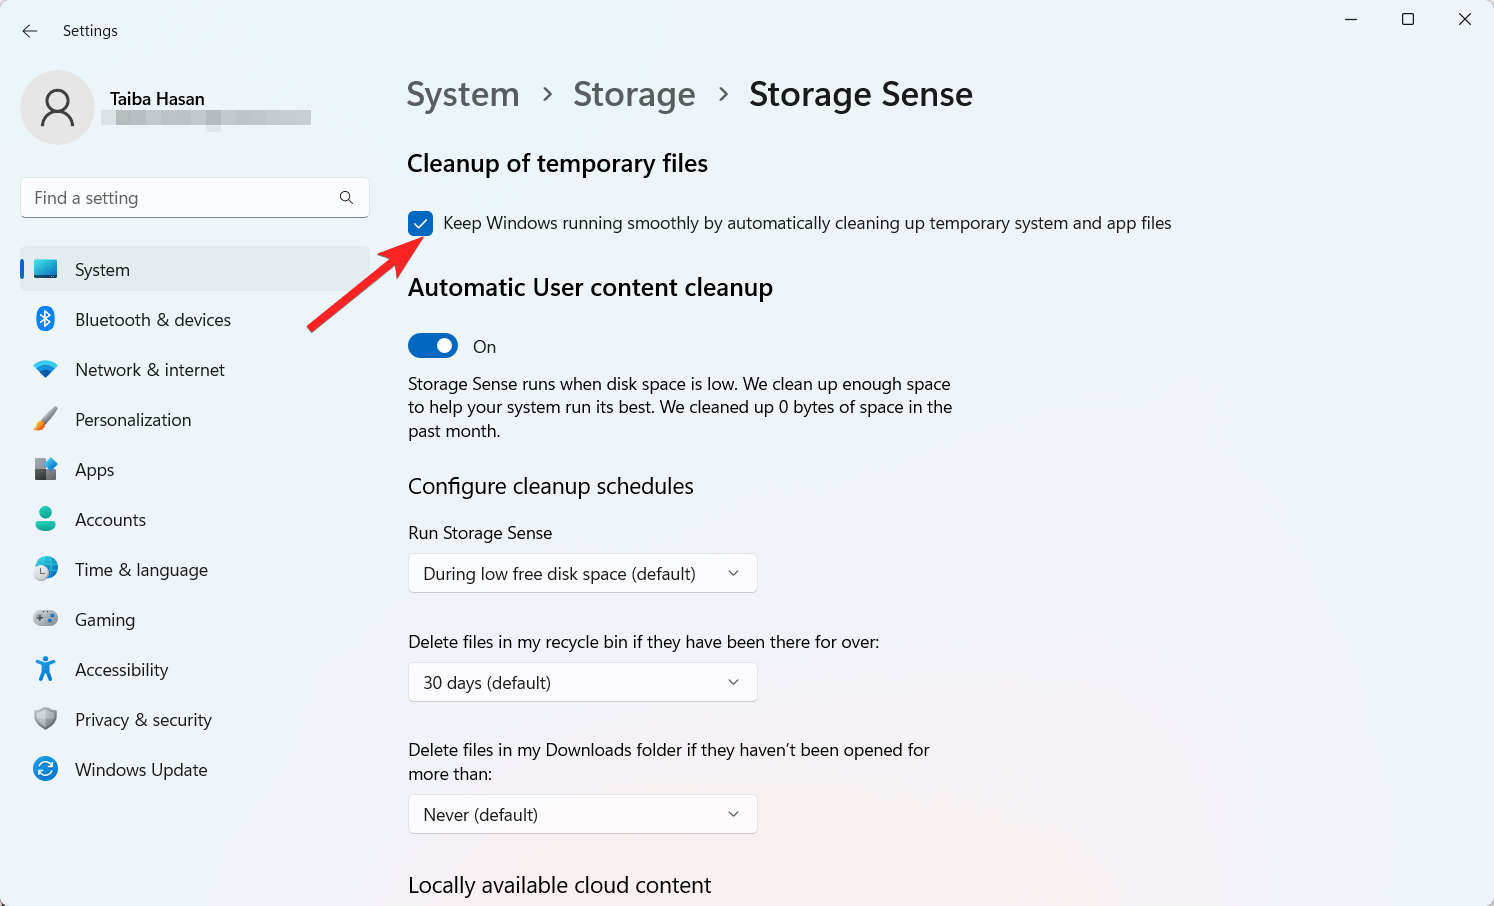 Settings-for-cleanup-of-temporary-files-using-Storage-Sense